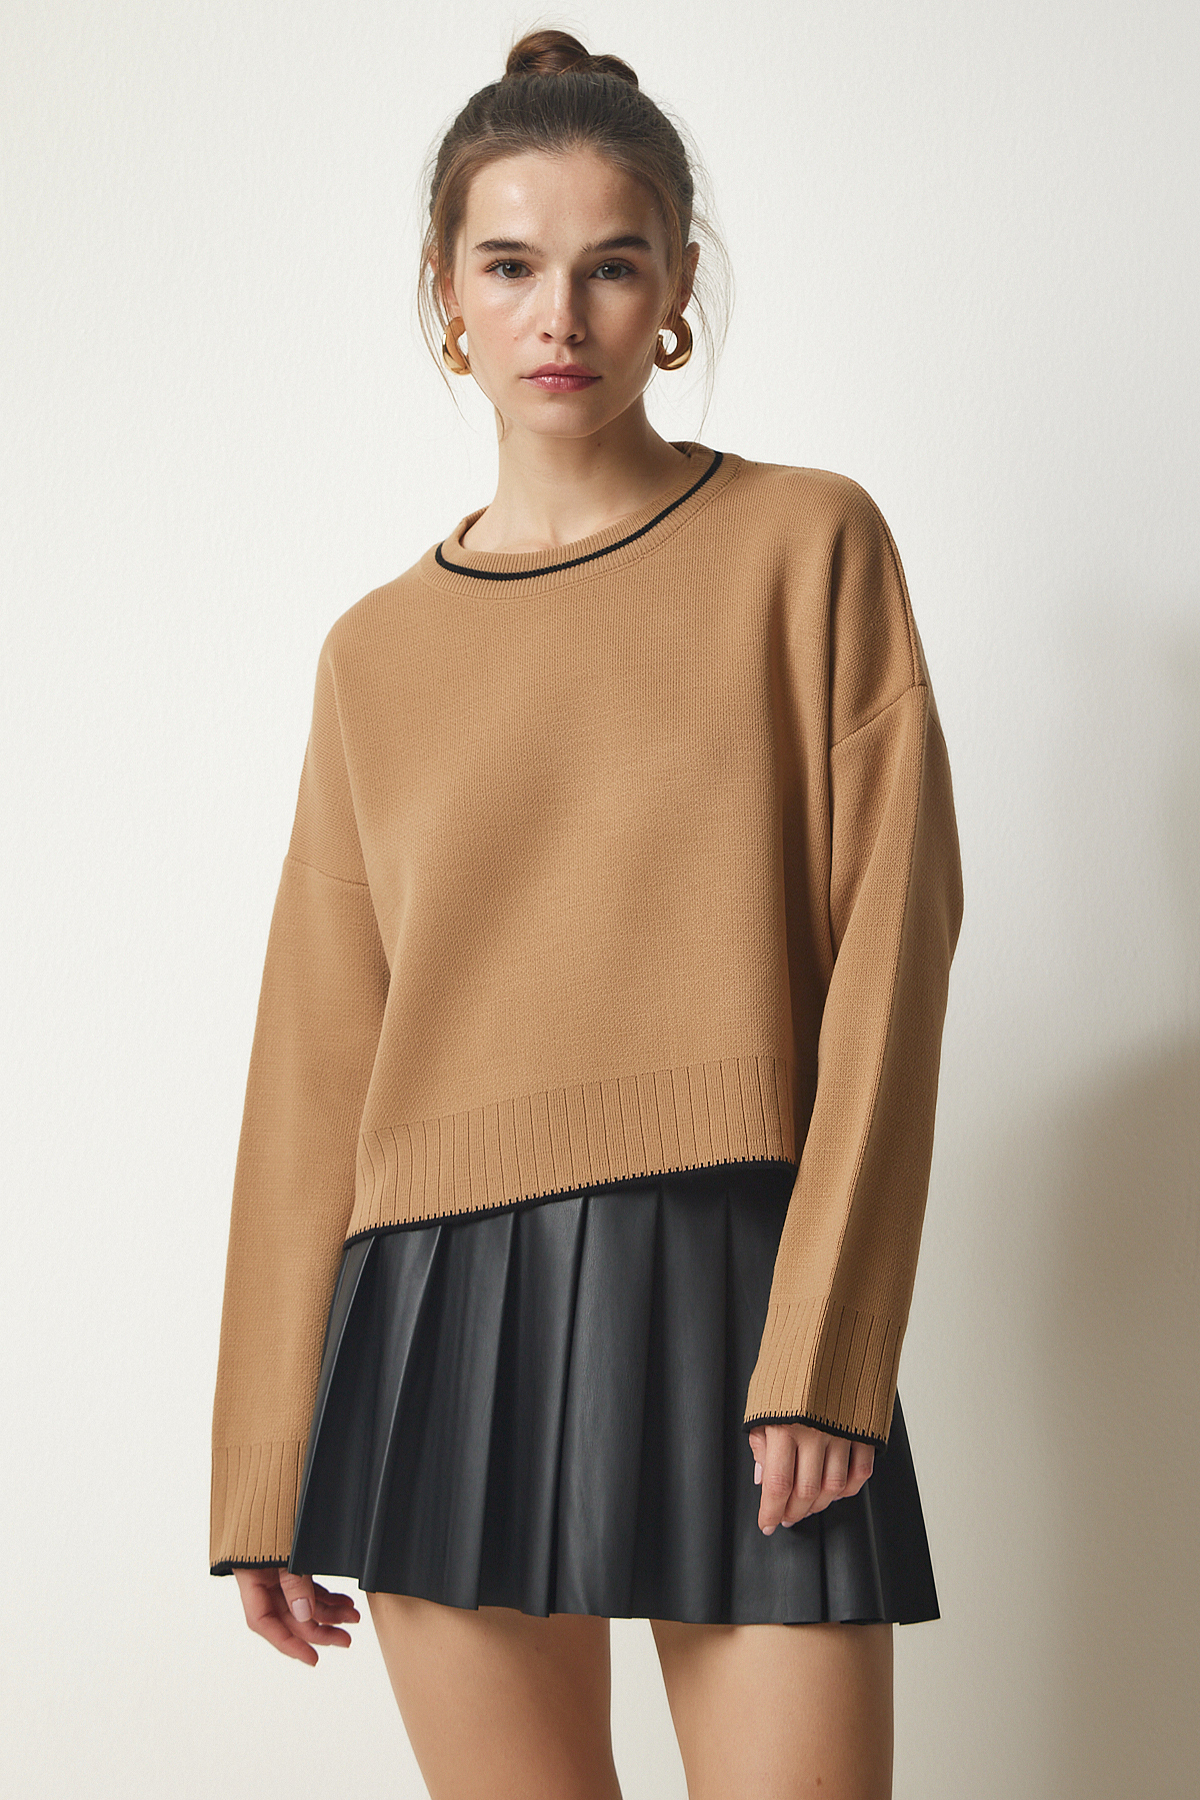 Levně Happiness İstanbul Women's Biscuit Basic Knitwear Sweater